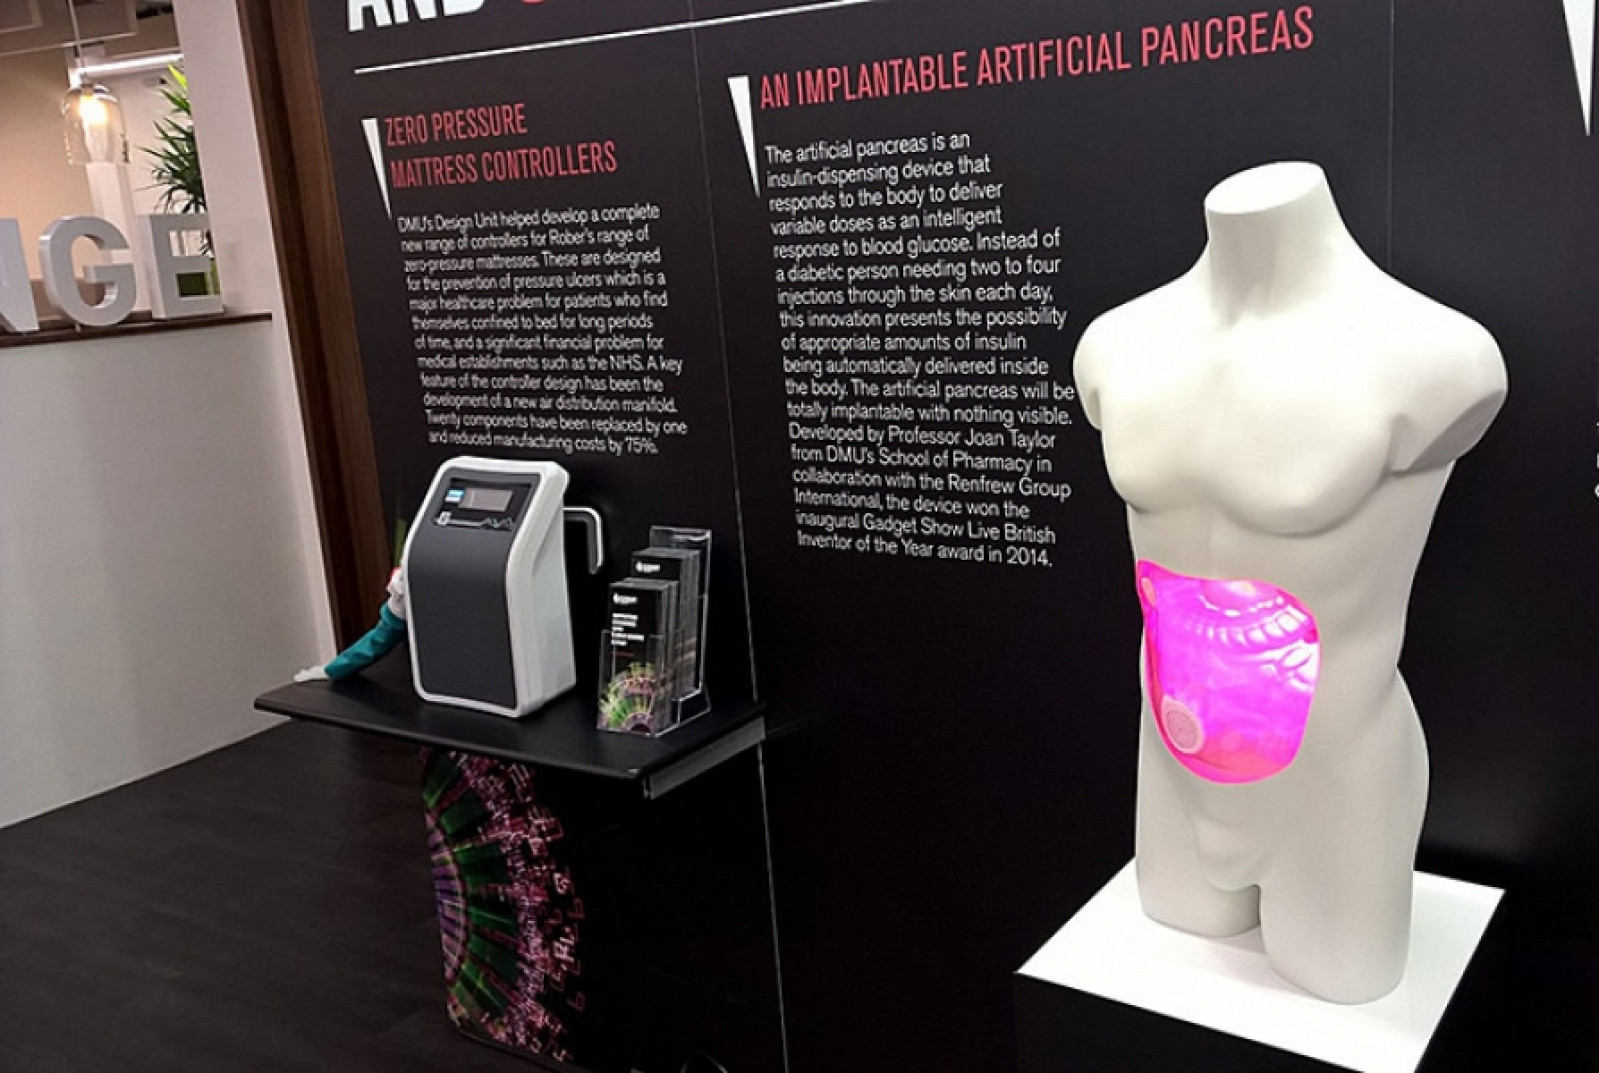 InSmart Artificial Pancreas showcased at the Confe...